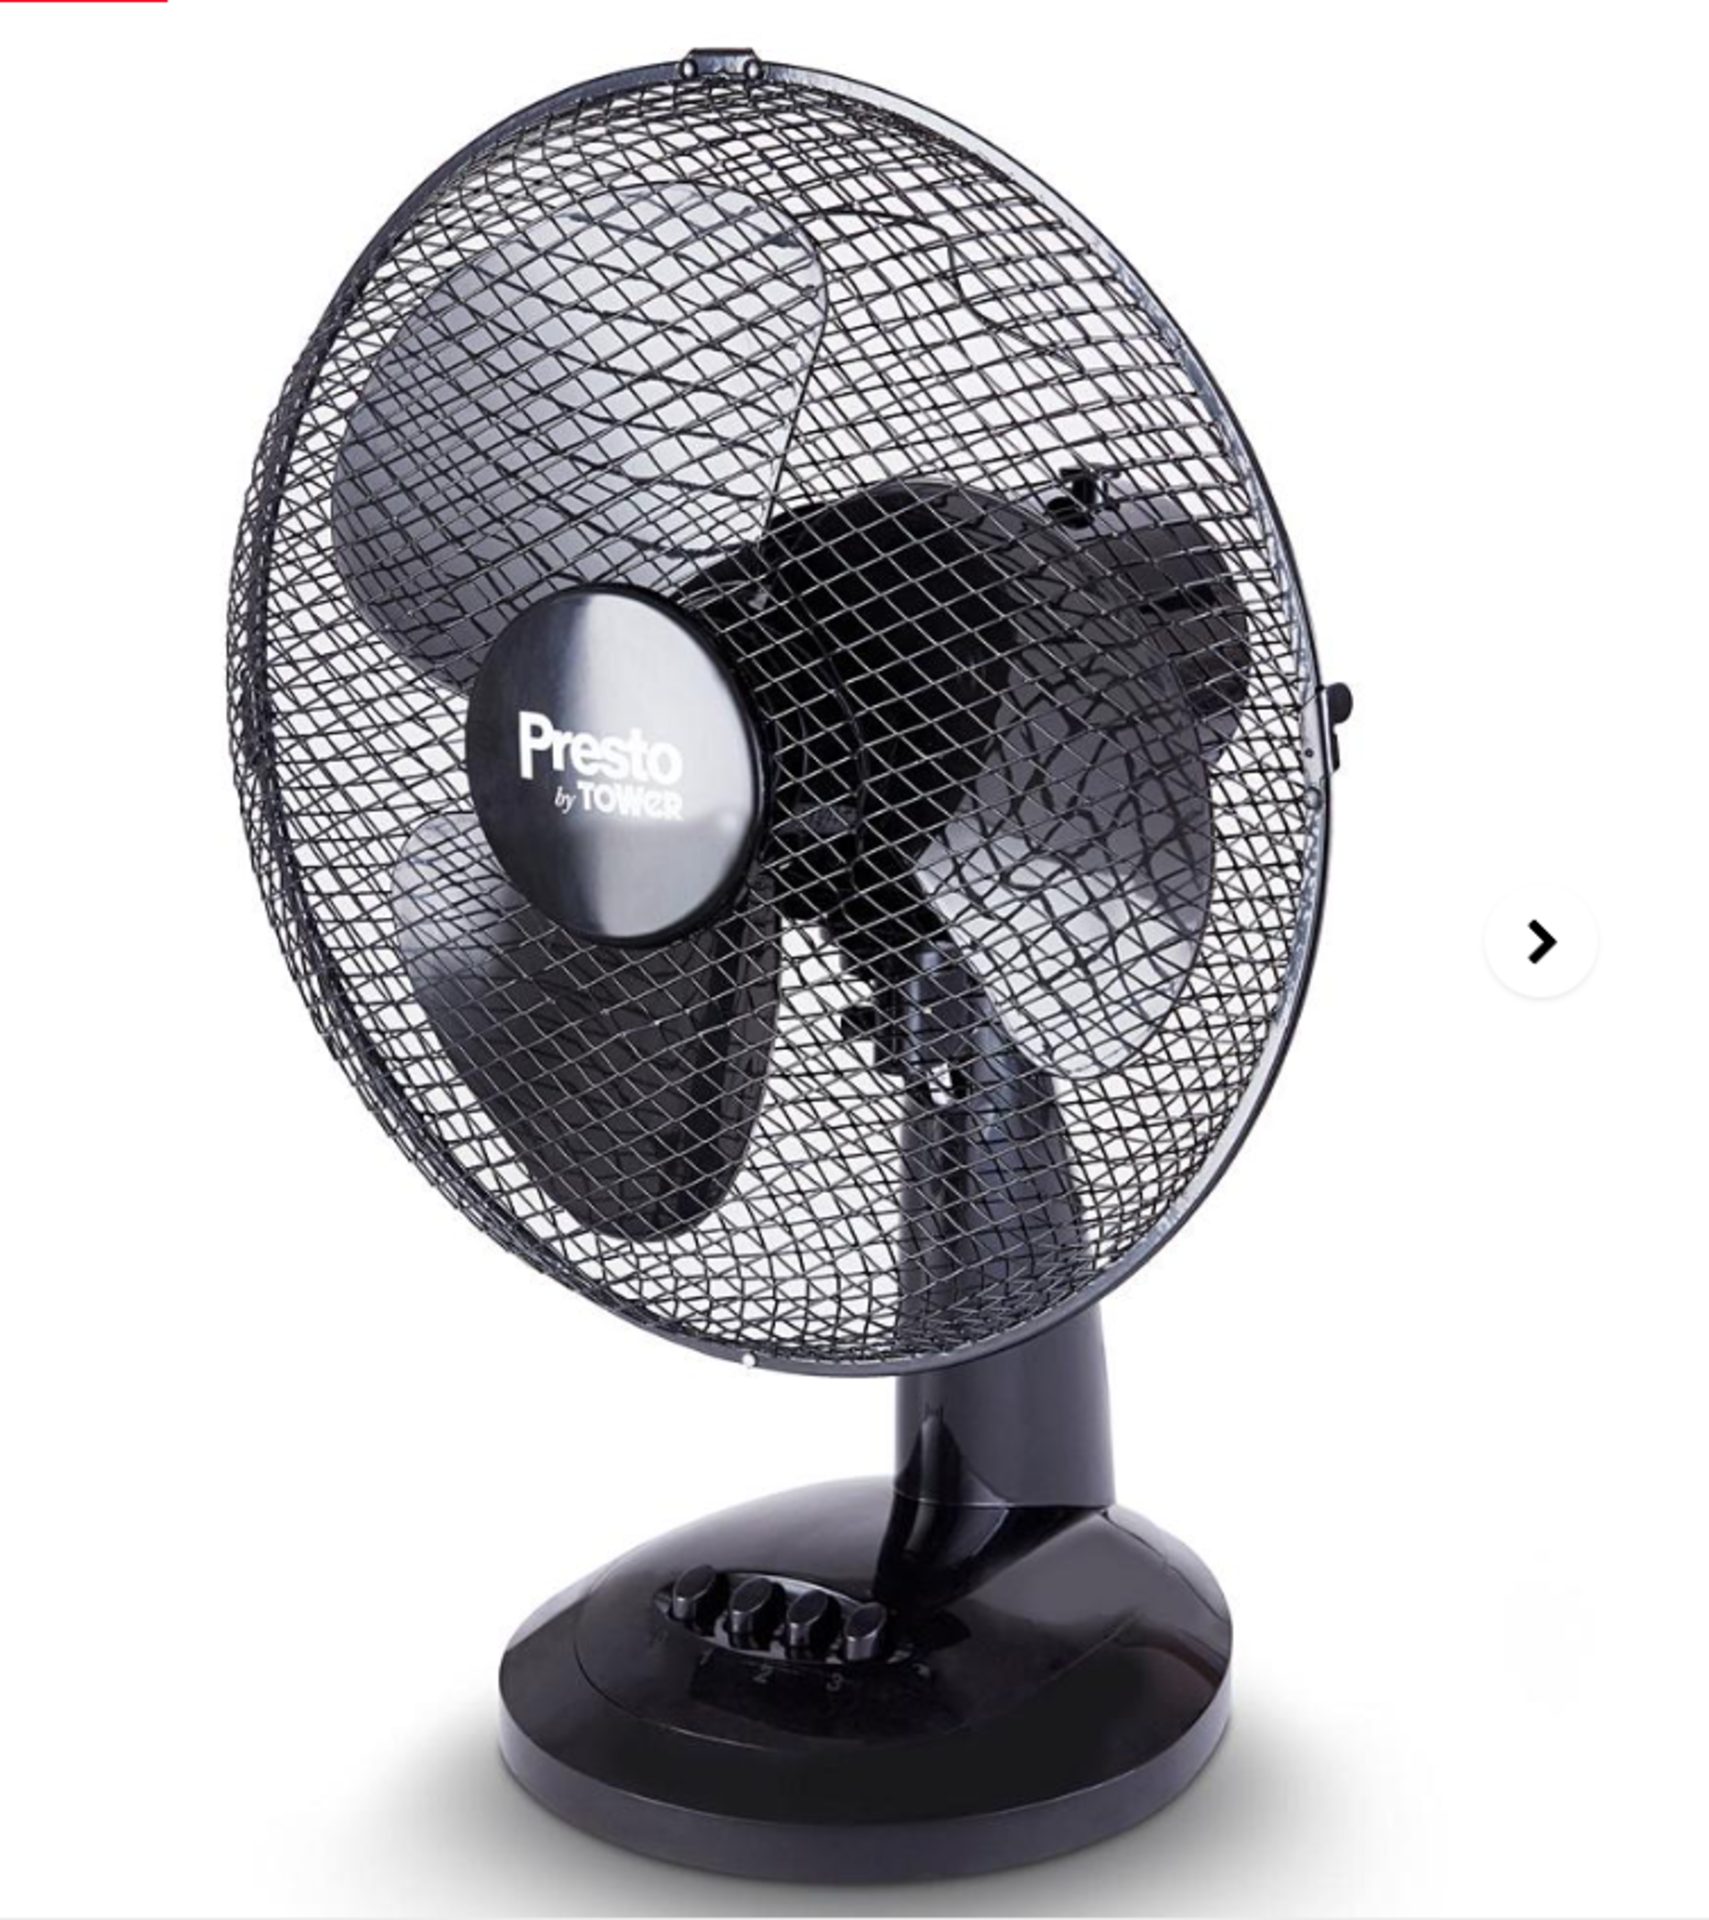 Tower 12 Inch Oscillating Black Desk Fan. - ER28. Effectively cool the air around you with this